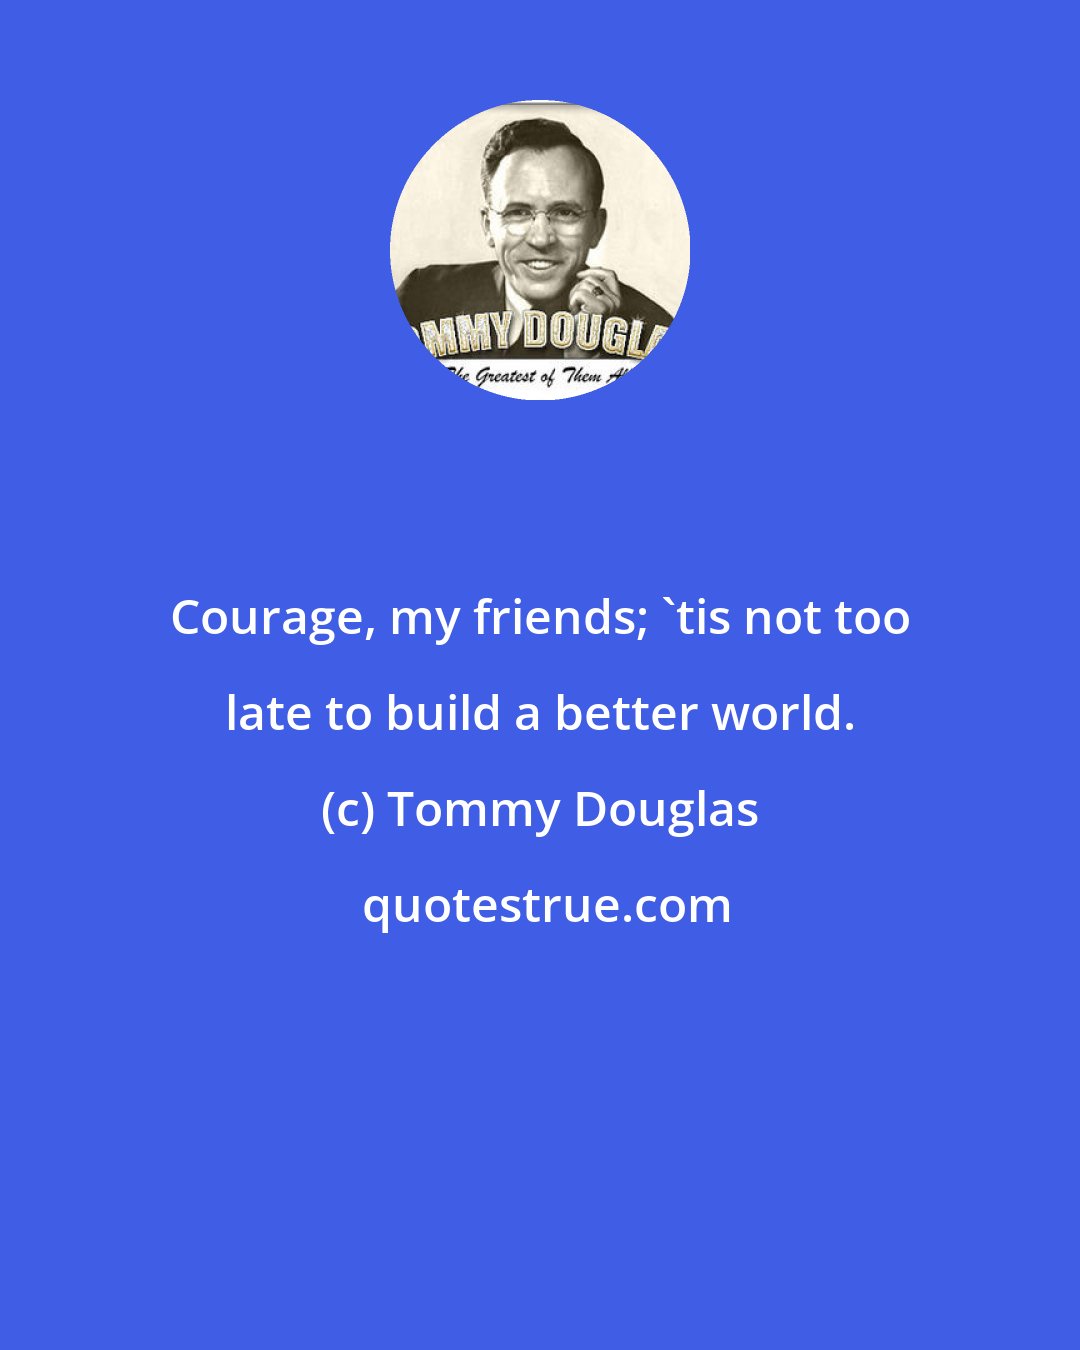 Tommy Douglas: Courage, my friends; 'tis not too late to build a better world.